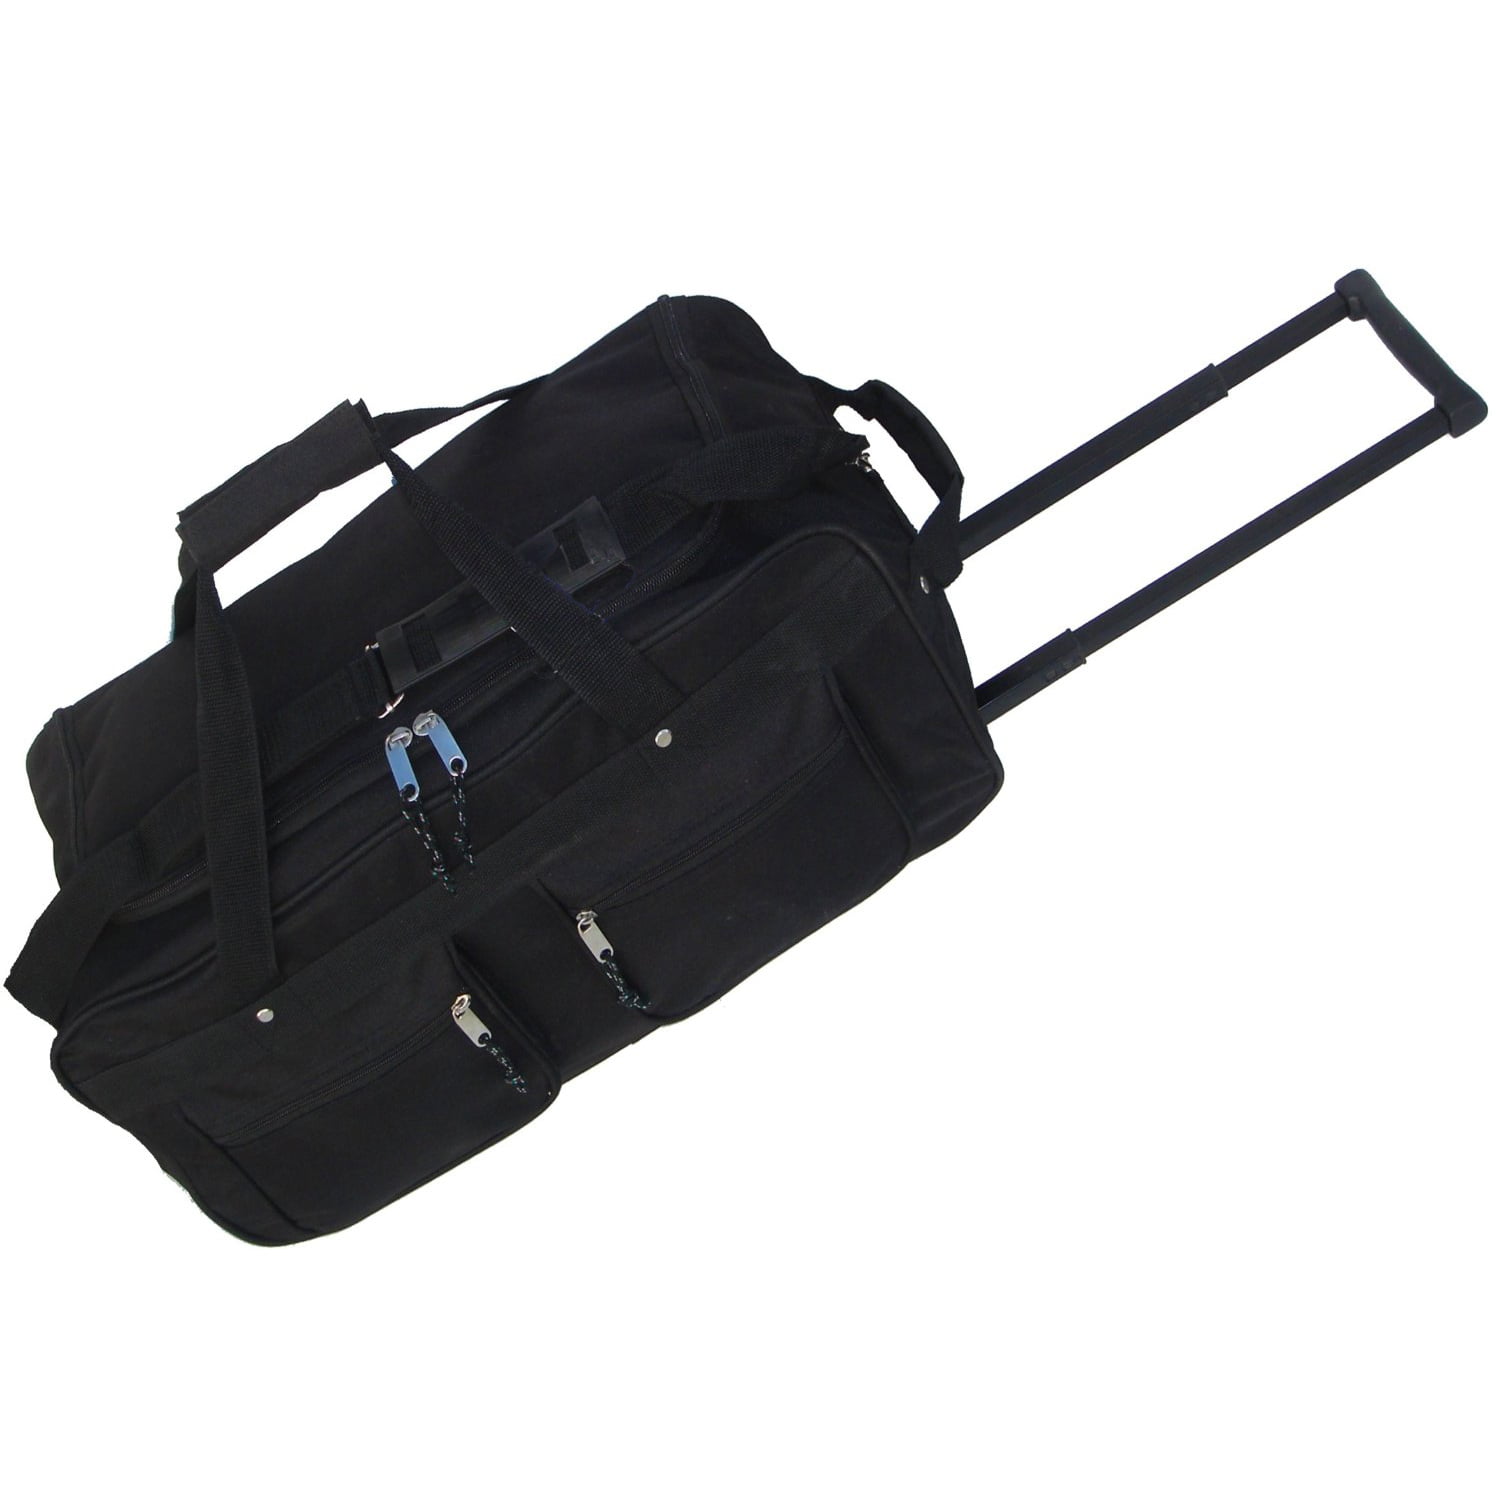 Every Day Carry Large Capacity Heavy Duty Rolling Duffel Bag - 0 - 0